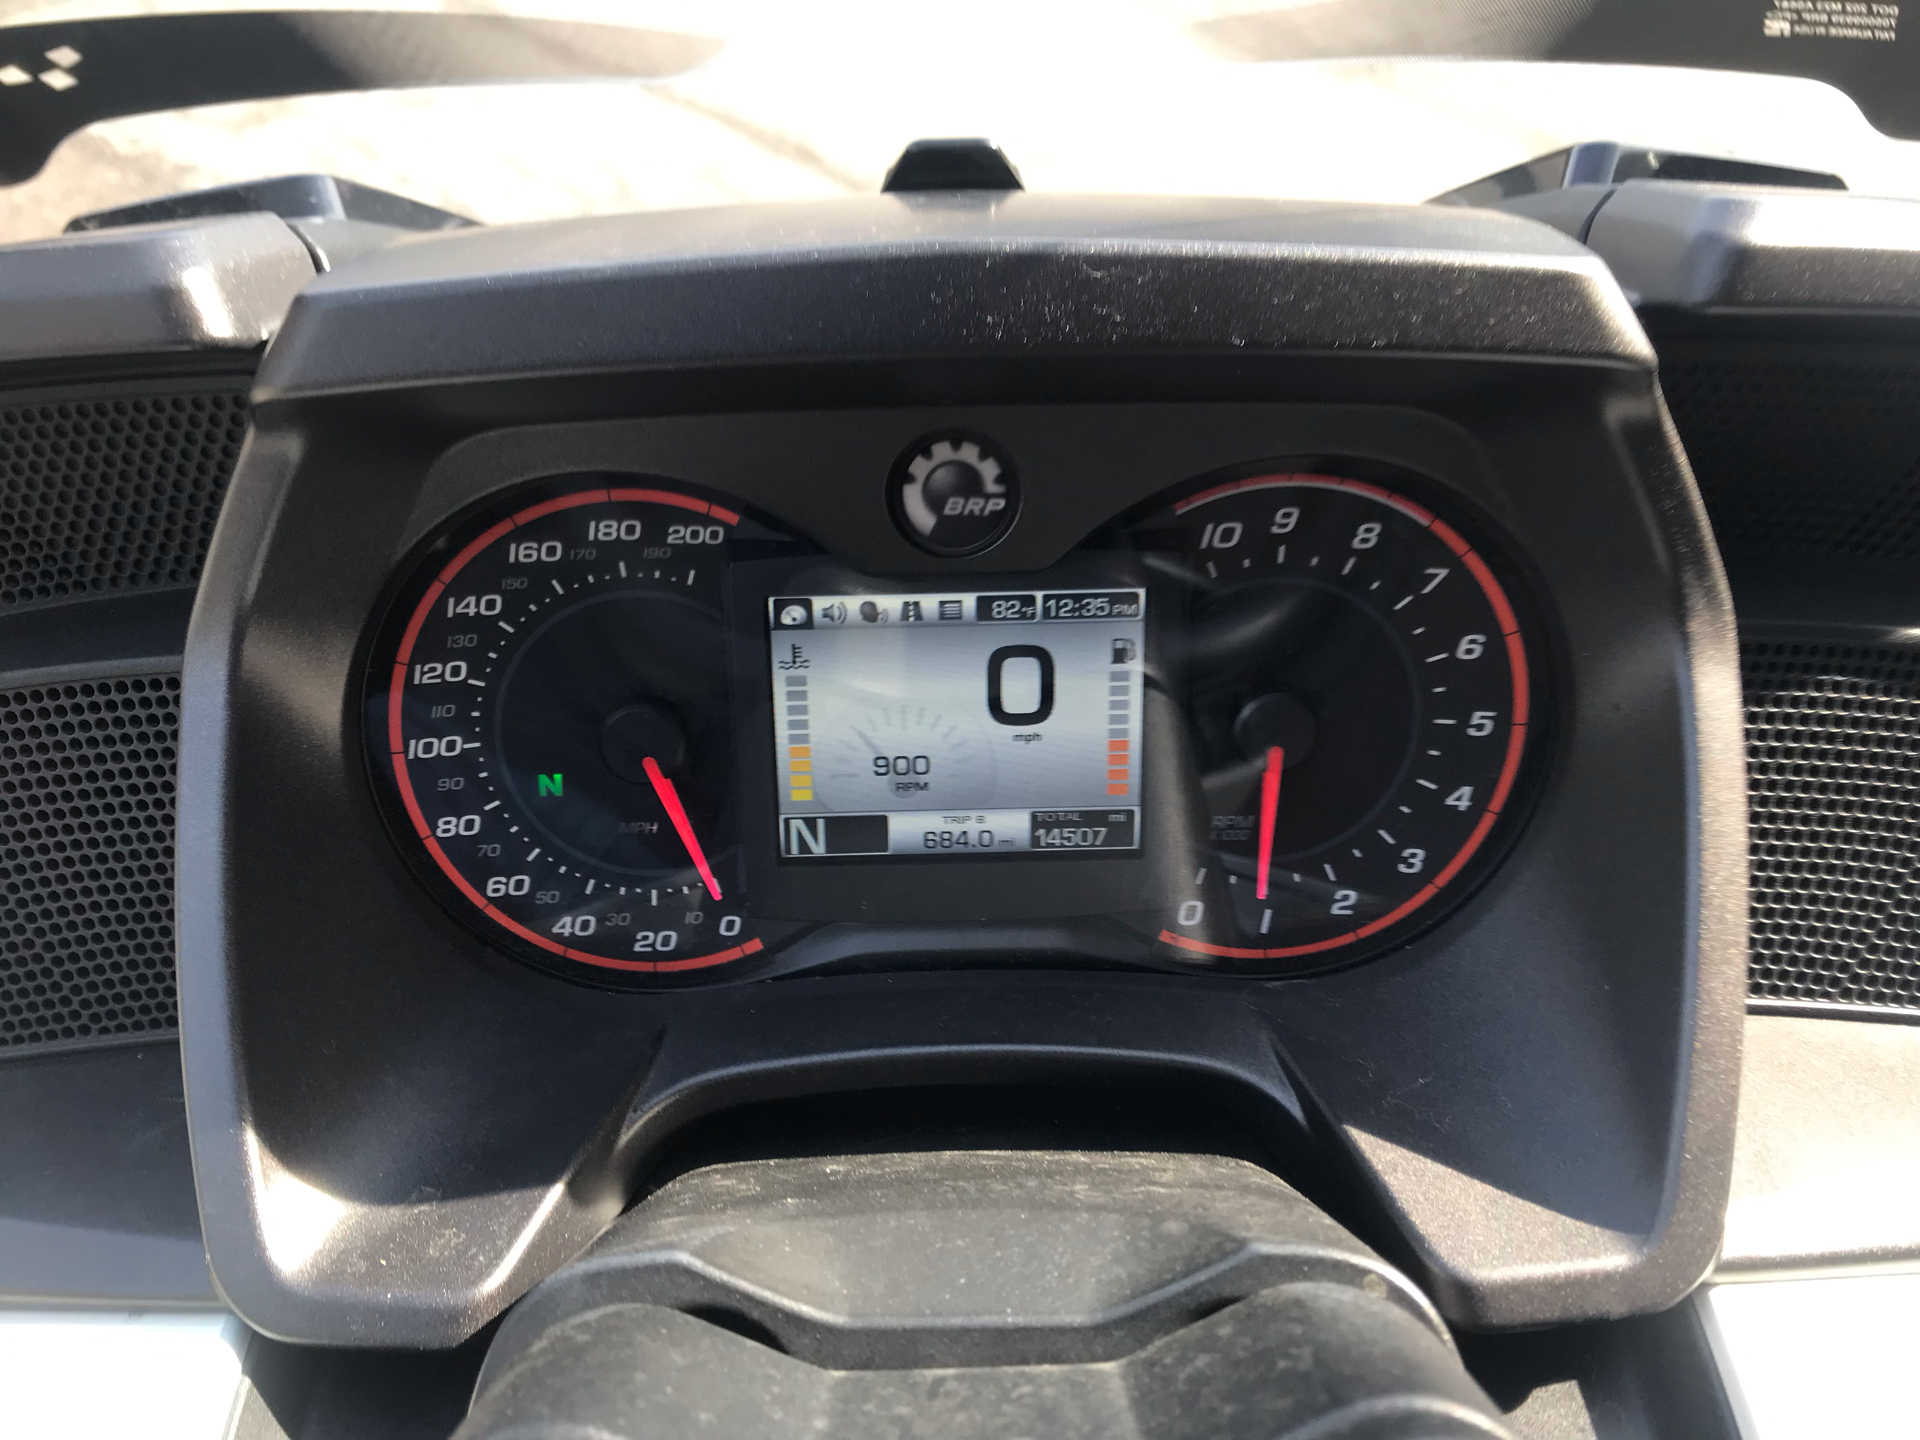 2016 Can-Am Spyder F3 Limited in Tyrone, Pennsylvania - Photo 11